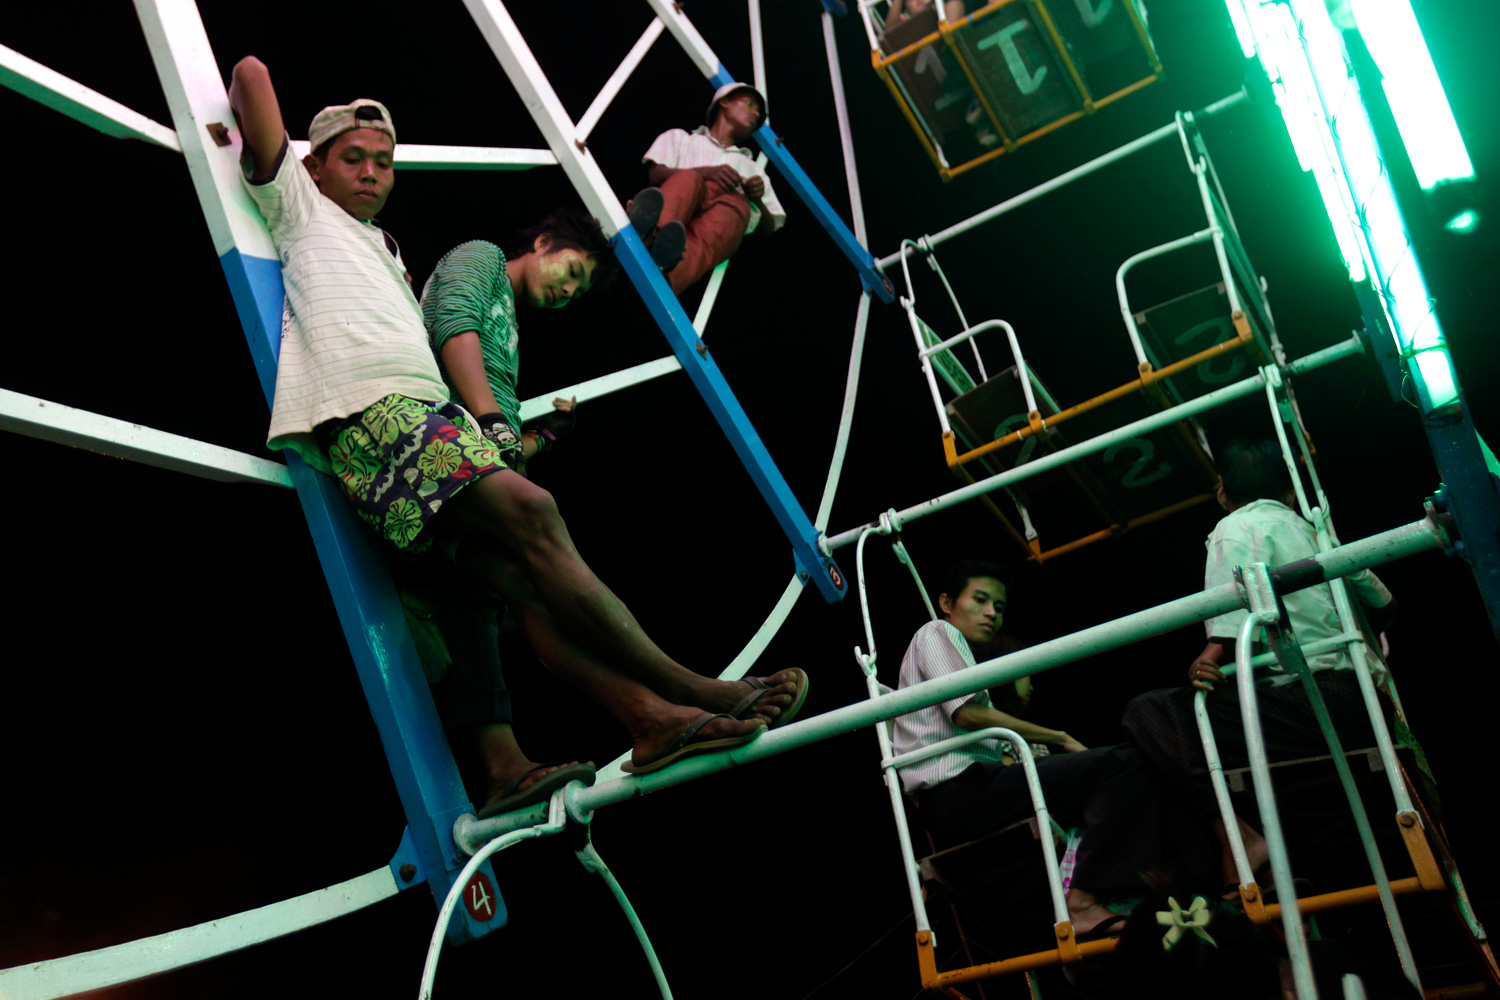 Feb. 22, 2012. Workers stand on a Ferris wheel as they wait for fairgoers at a carnival ground near the Shwedagon Pagoda during its 2600th anniversary celebrations in Yangon, Myanmar.